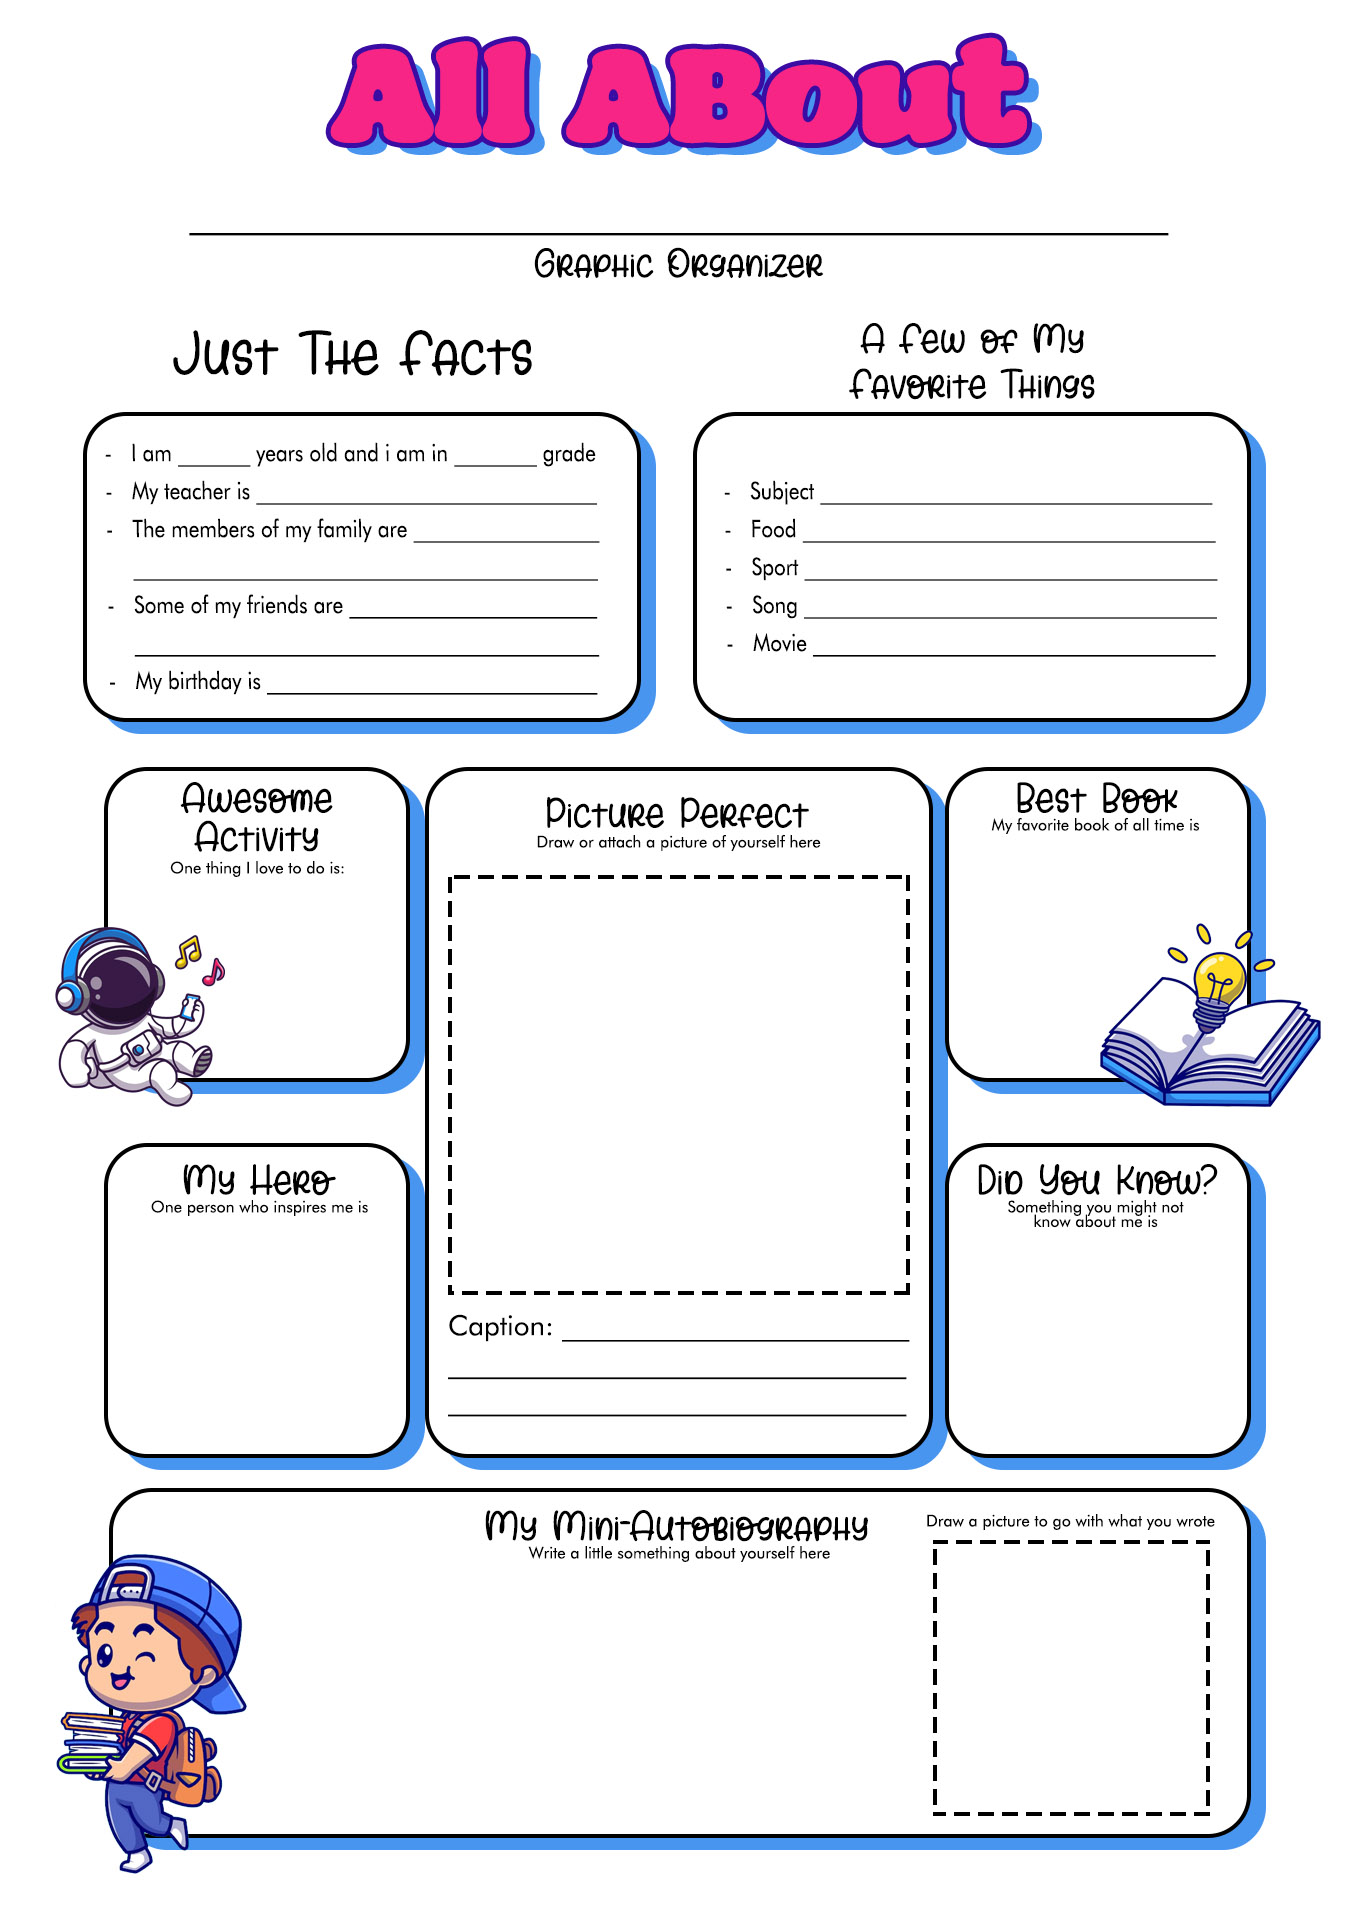 All About Me Graphic Organizer Image